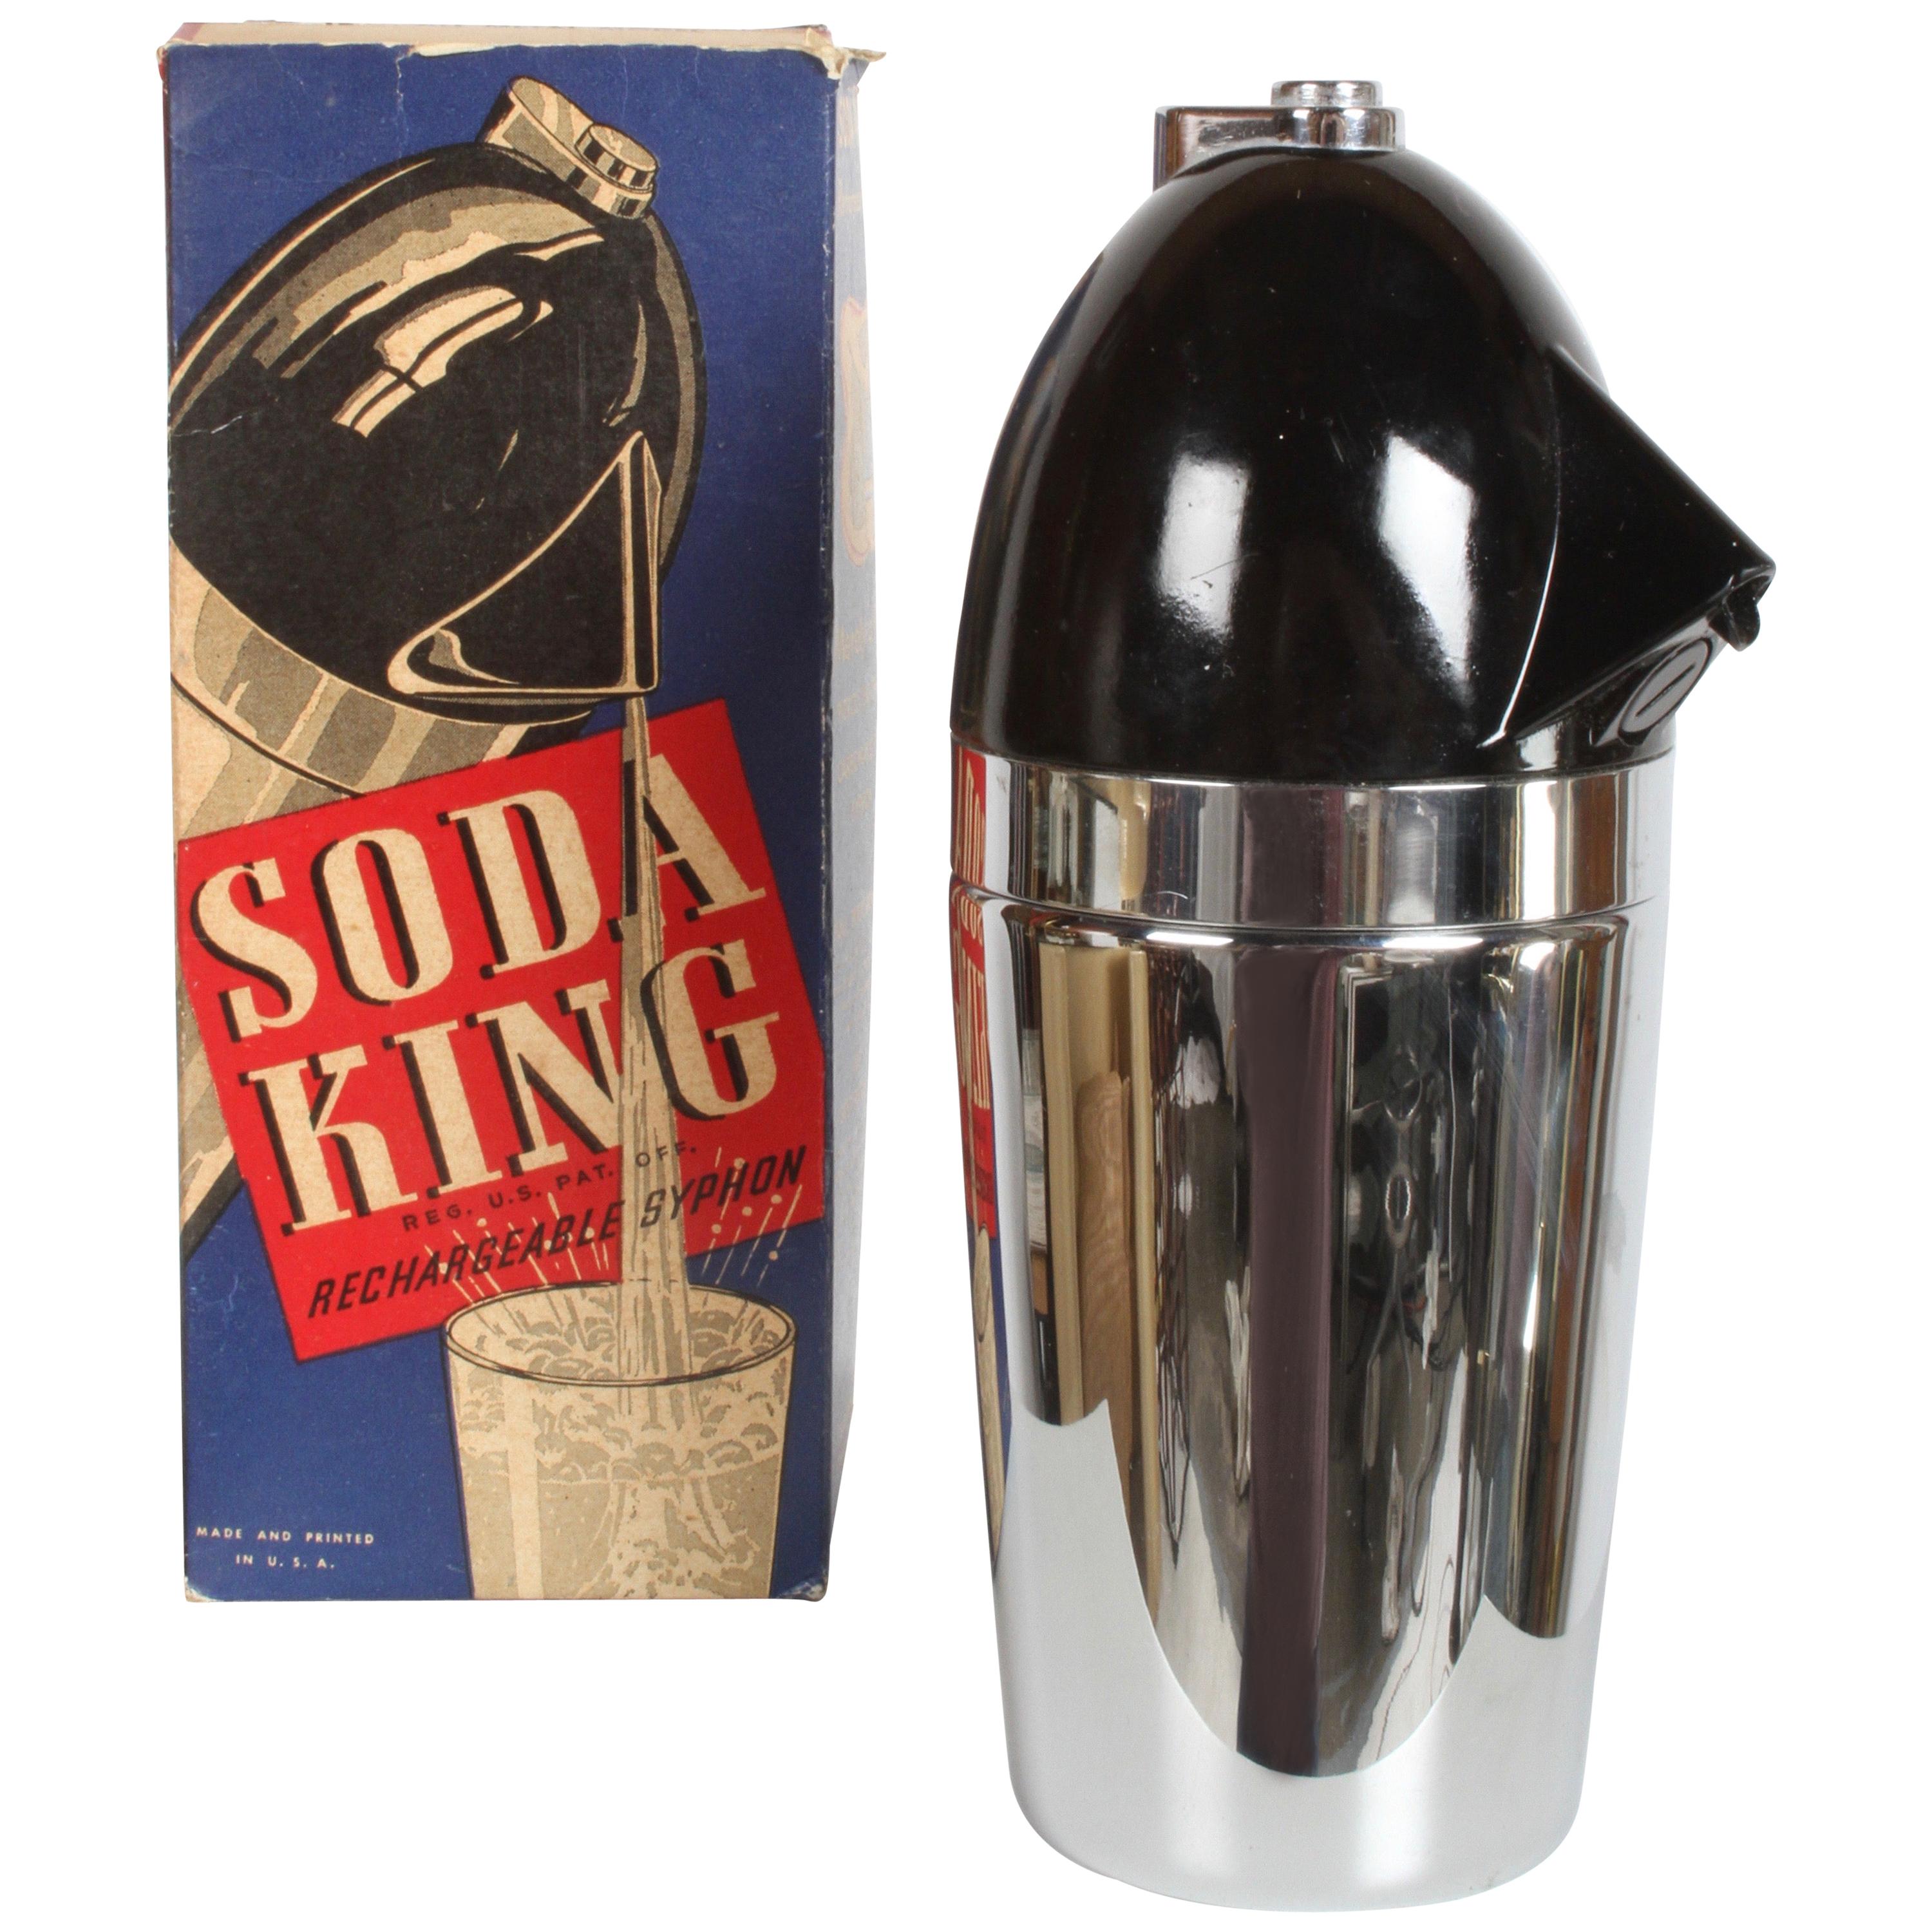 Norman Bel Geddes Soda King Rechargeable Syphon circa 1938, Unused